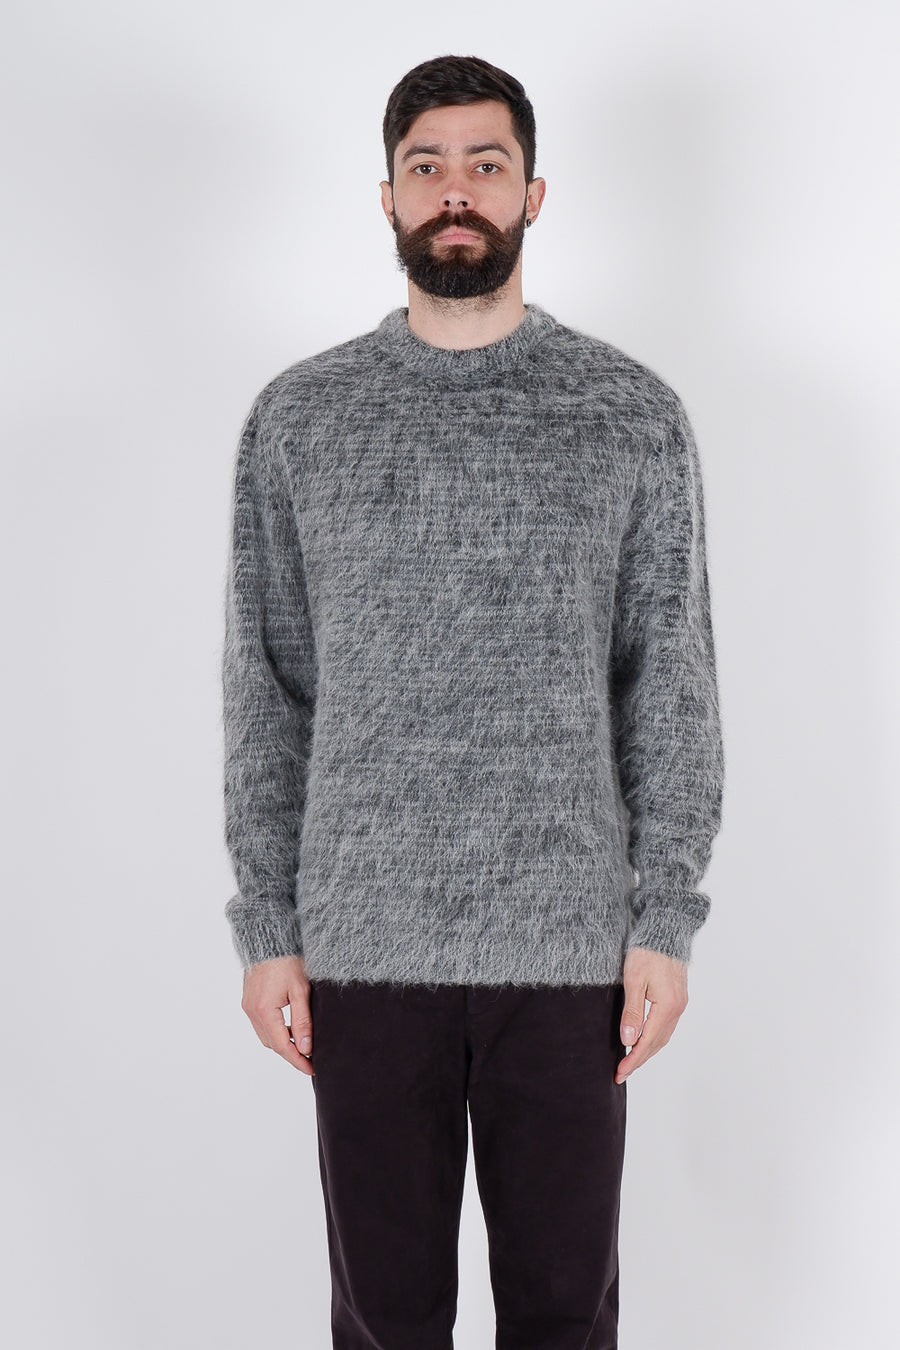 Buy the Daniele Fiesoli Brushed Alpaca Mohair Sweater Grey at Intro. Spend £50 for free UK delivery. Official stockists. We ship worldwide.